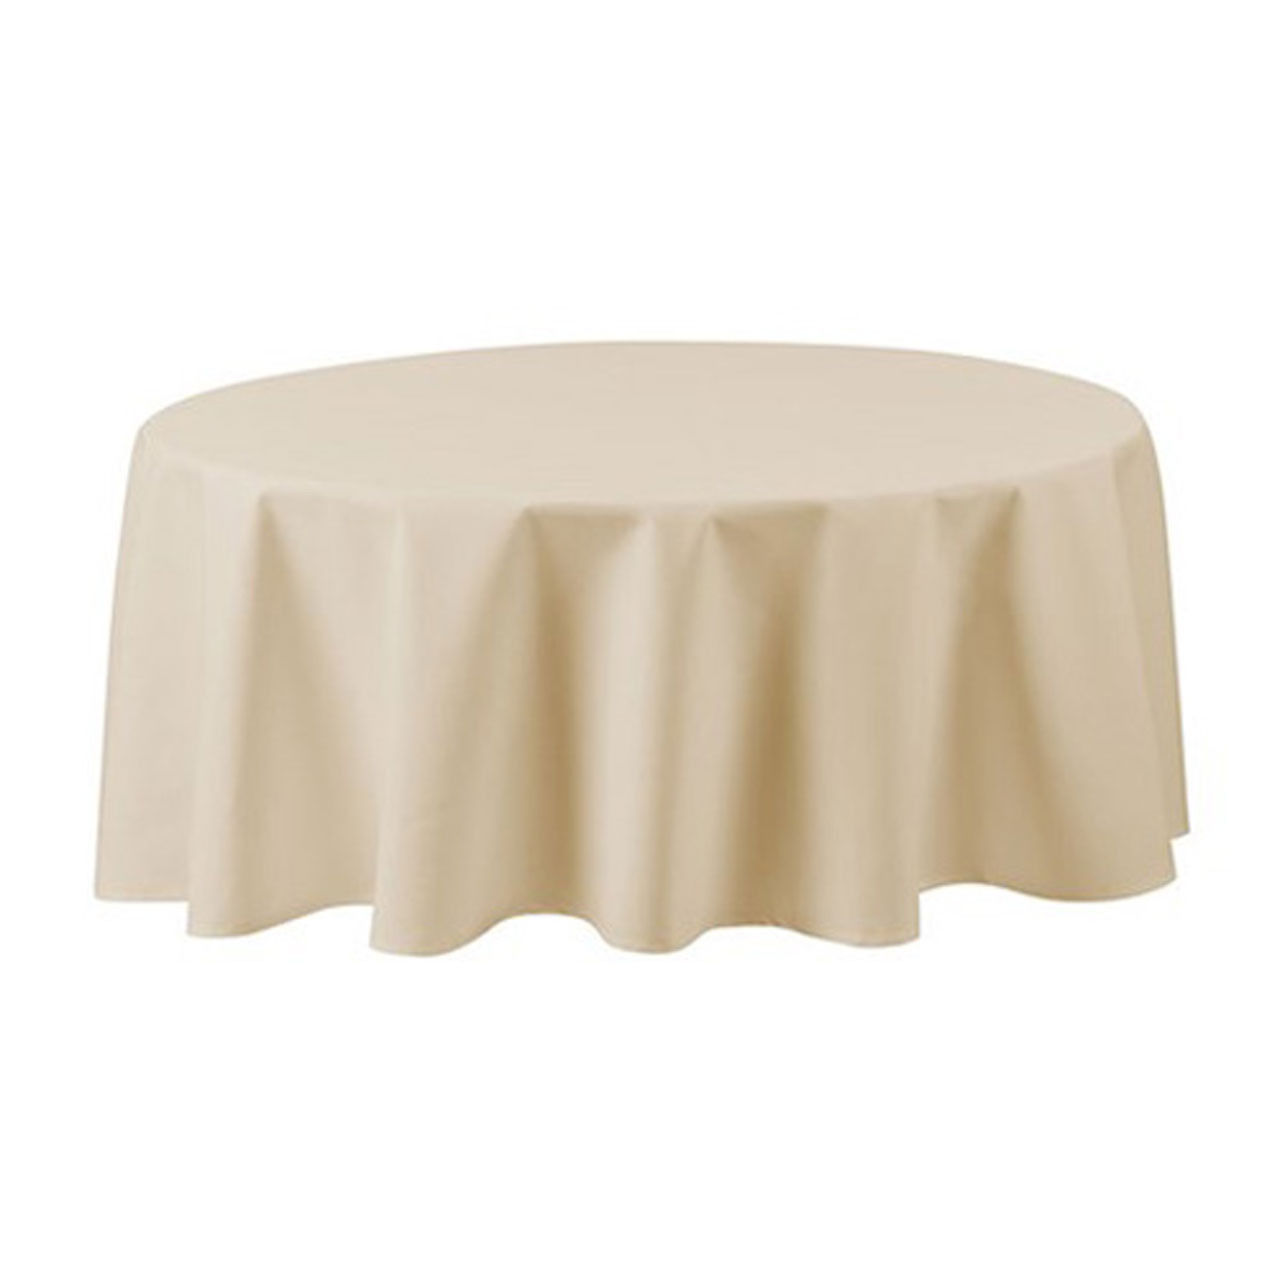 Seamless Ivory 120" Round Tablecloth Questions & Answers